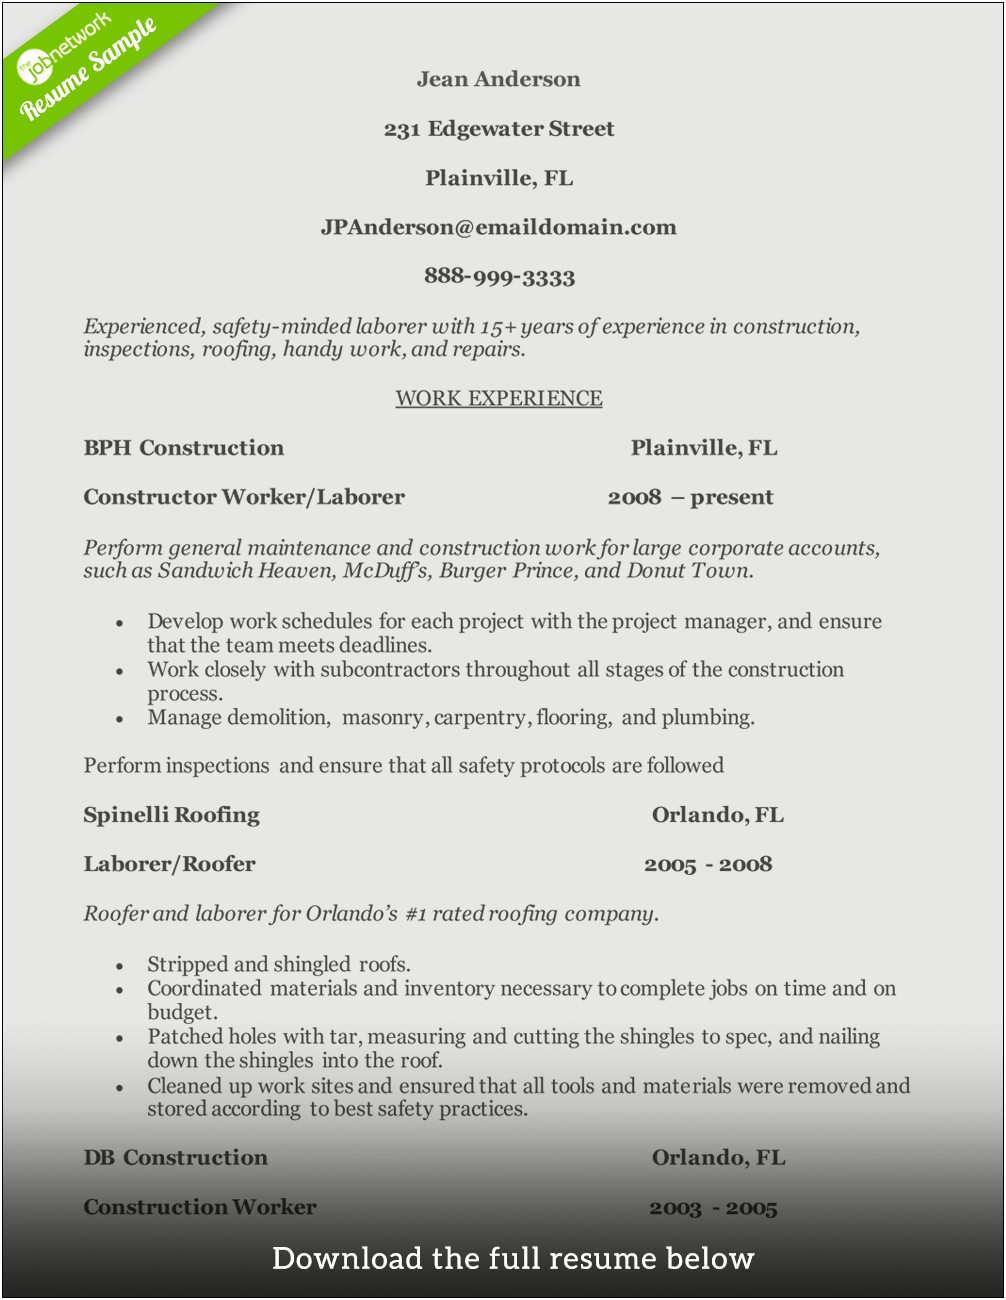 Free Resume Template For Laborer